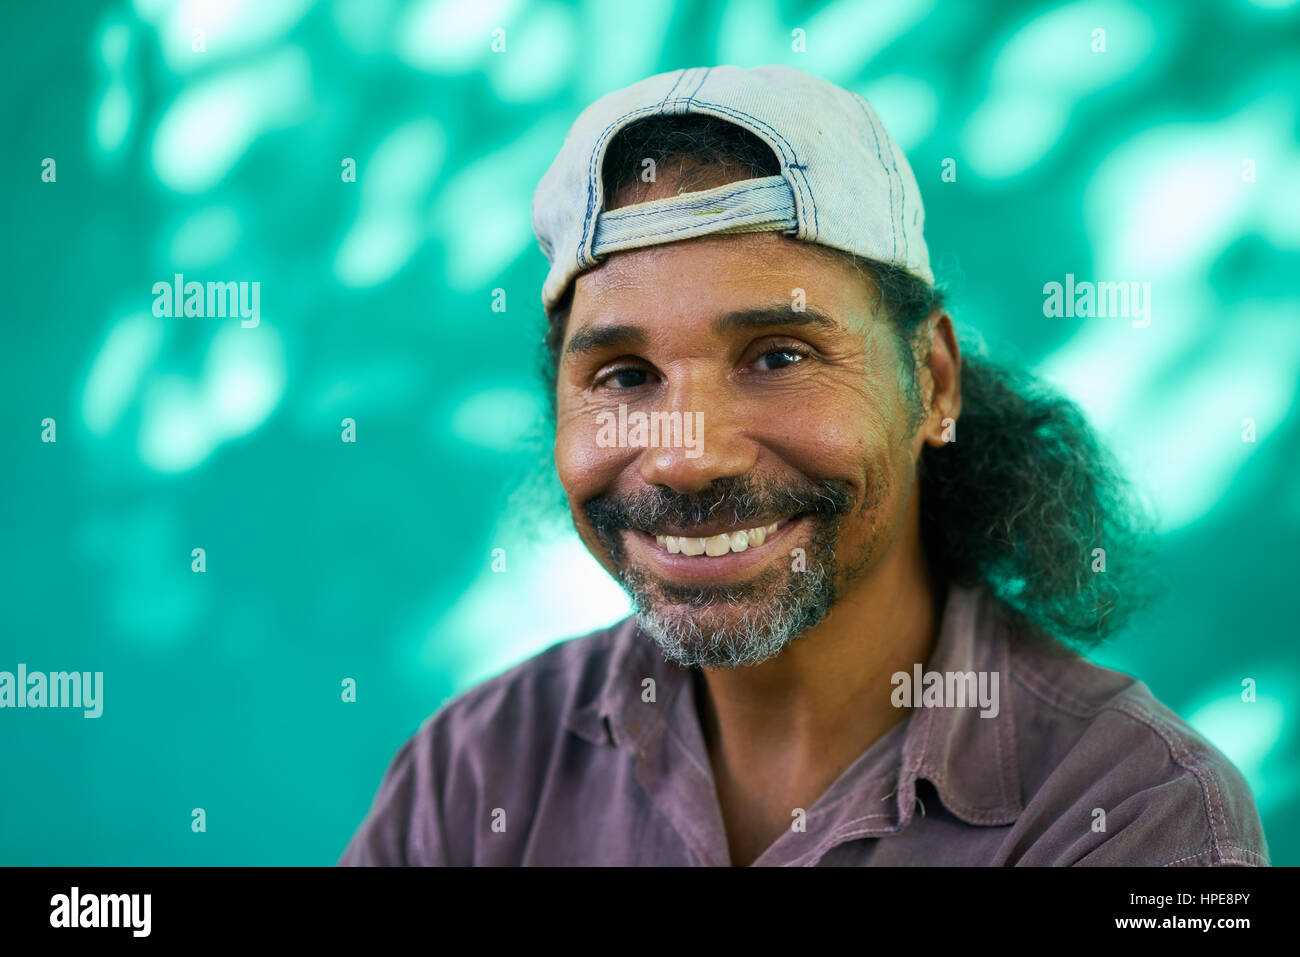 Real Cuban people and feelings, portrait of happy hispanic man with goatee, baseball cap and long hair from Havana, Cuba looking at camera and laughin Stock Photo